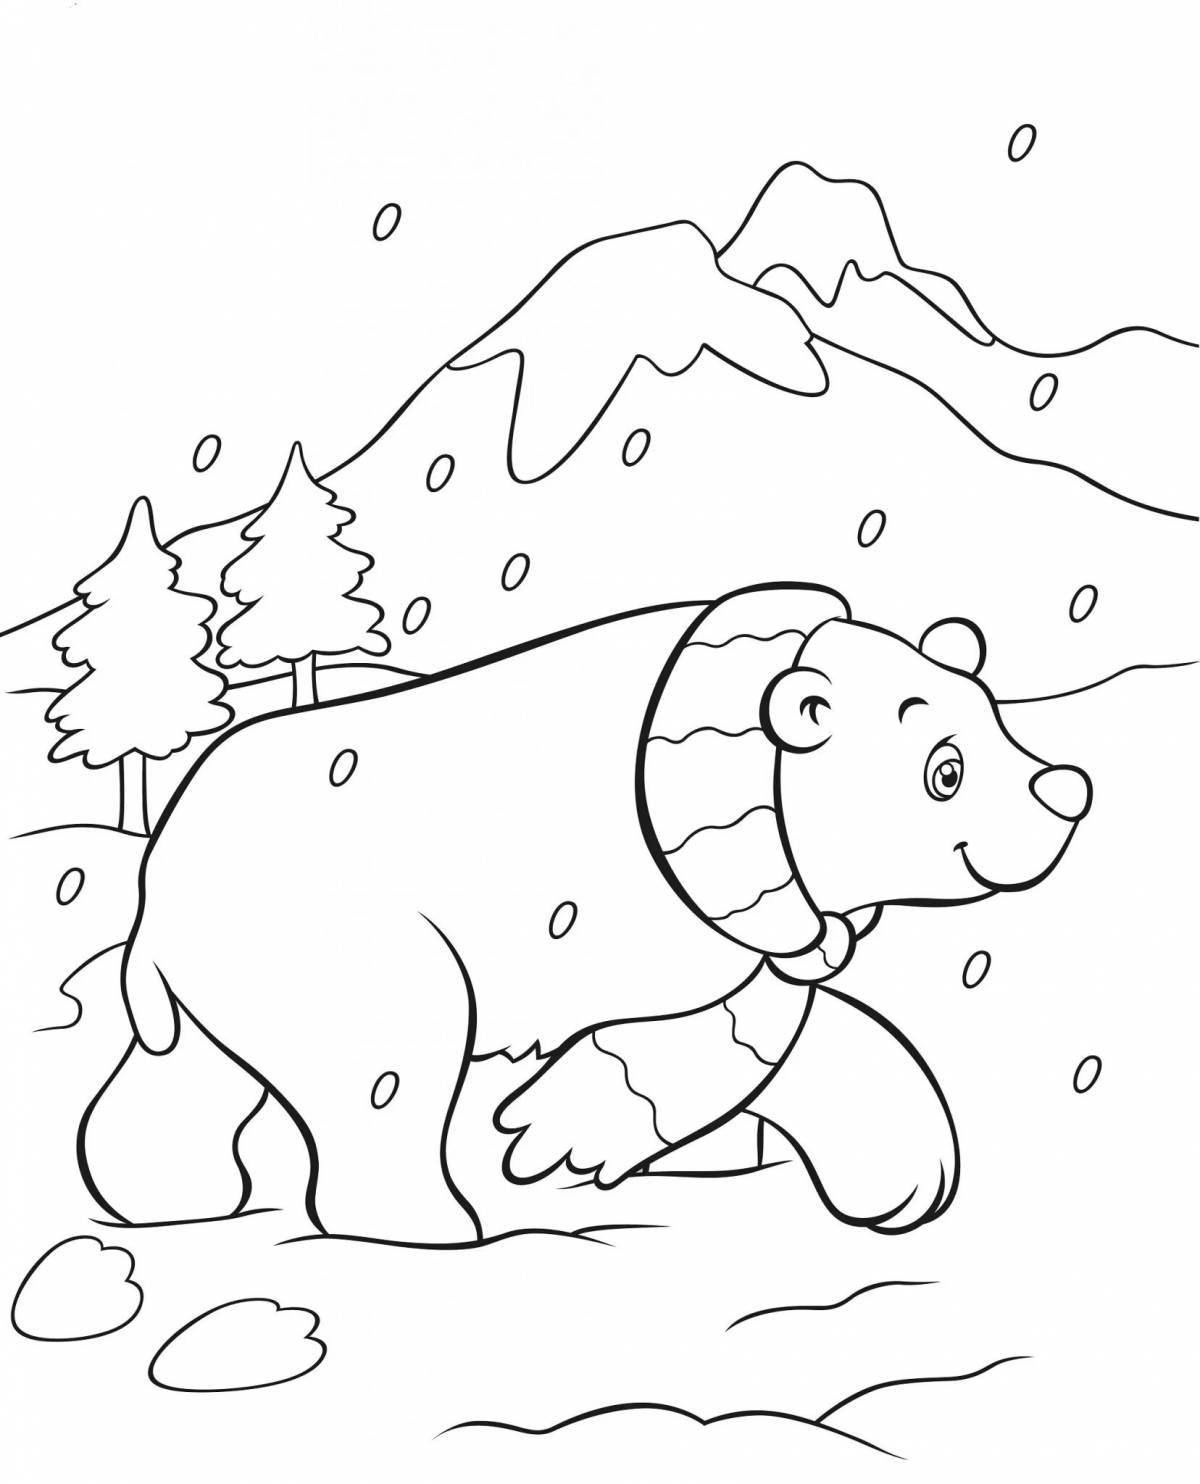 Majestic snowy owl coloring page